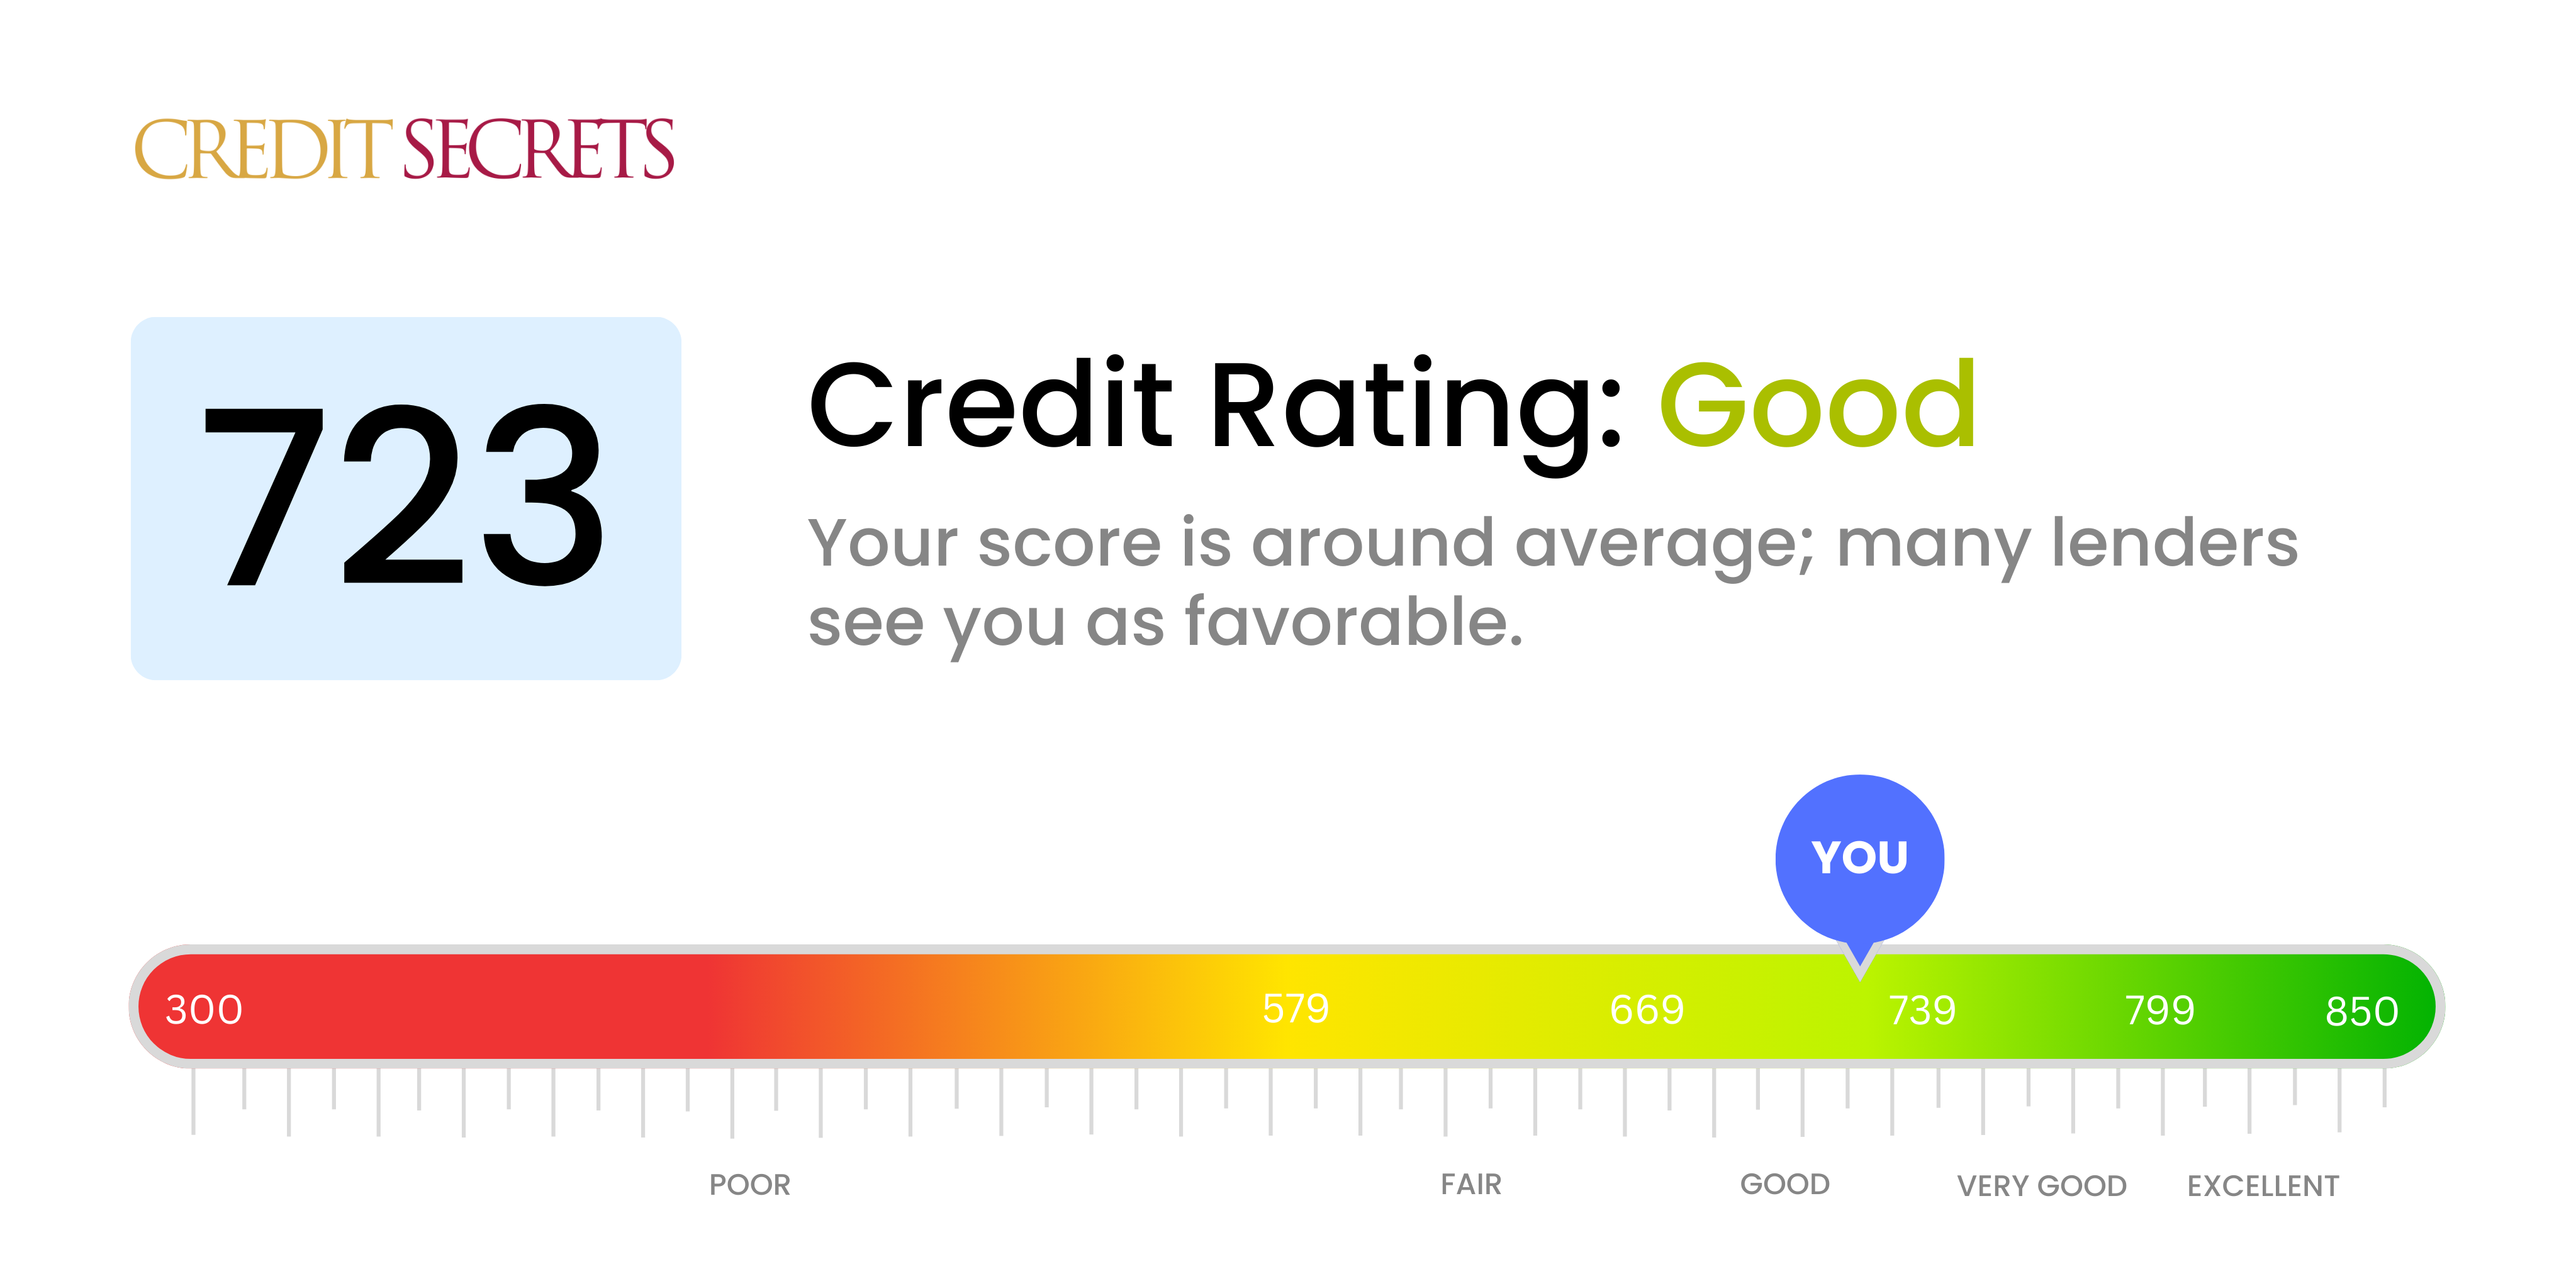 Is 723 a good credit score?